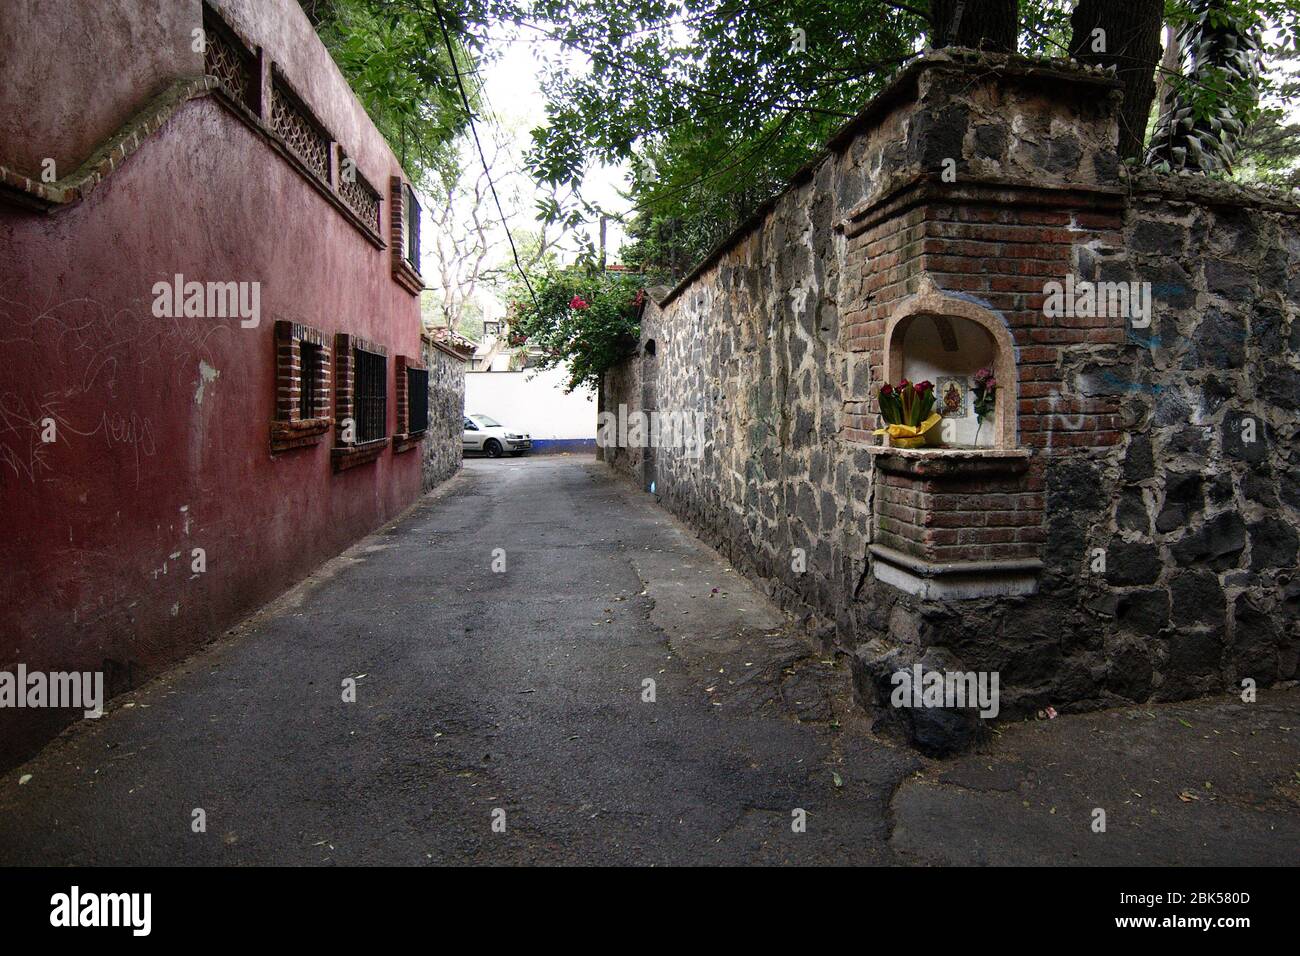 Mexico City, Mexico - 2019: The Callejon del Agacate (Avocado Alley) is  a famous typical alley in the traditional Coyoacan district. Stock Photo